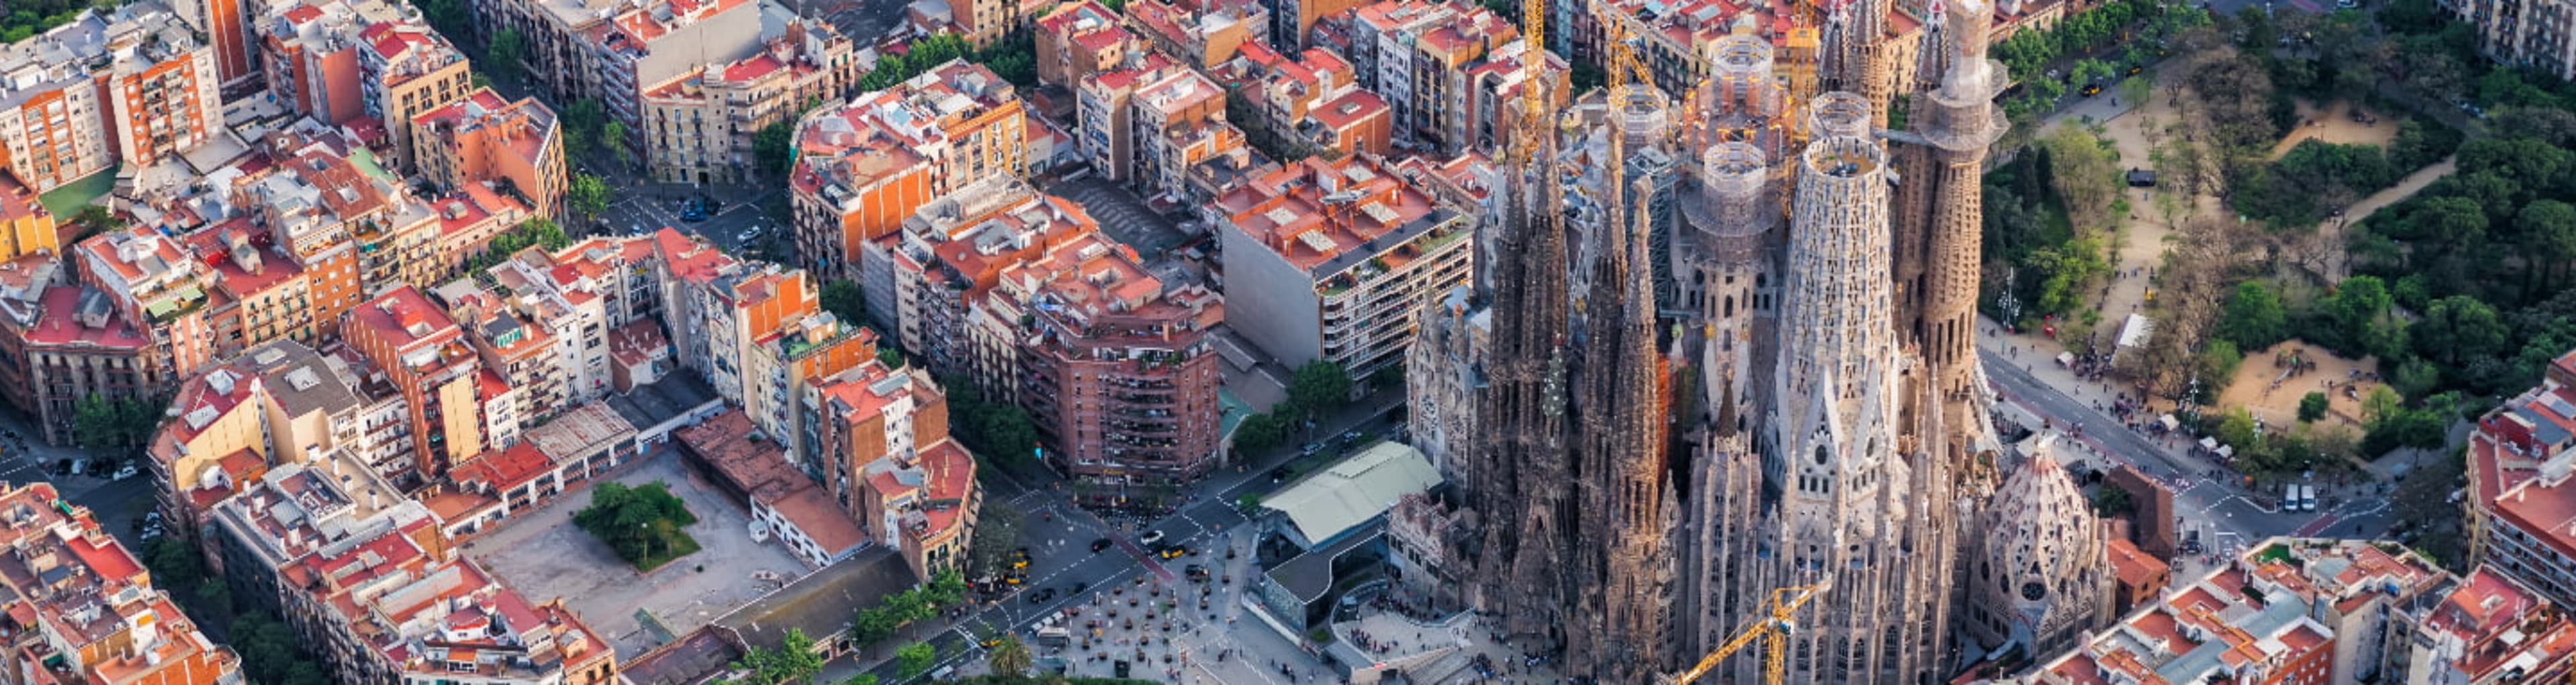 The Sagrada Familia and surrounding city blocks viewed from above